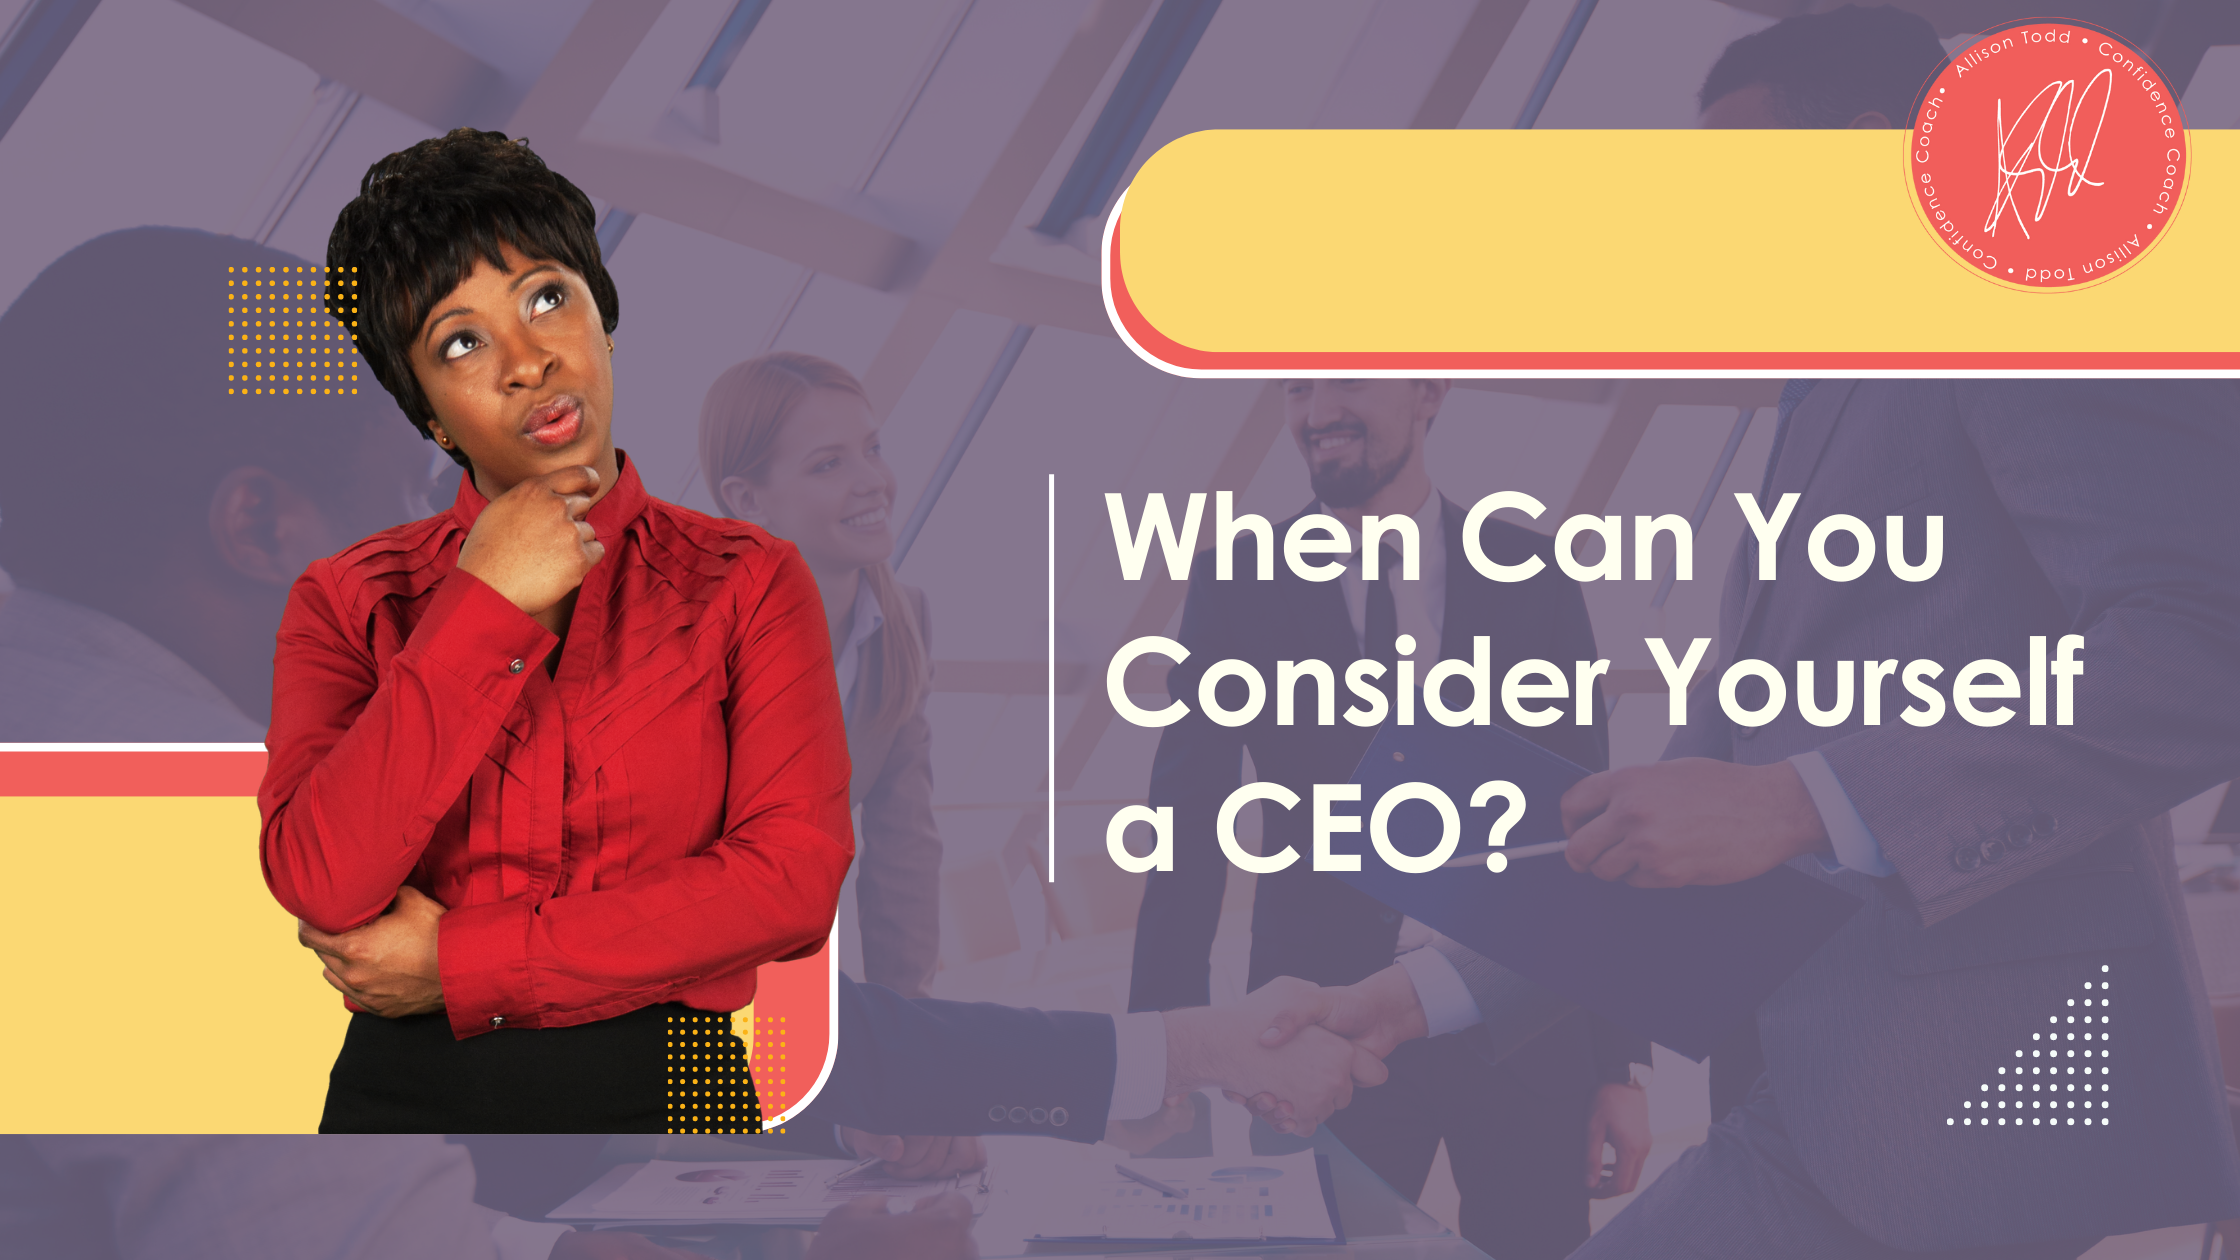 When Can You Consider Yourself a CEO?